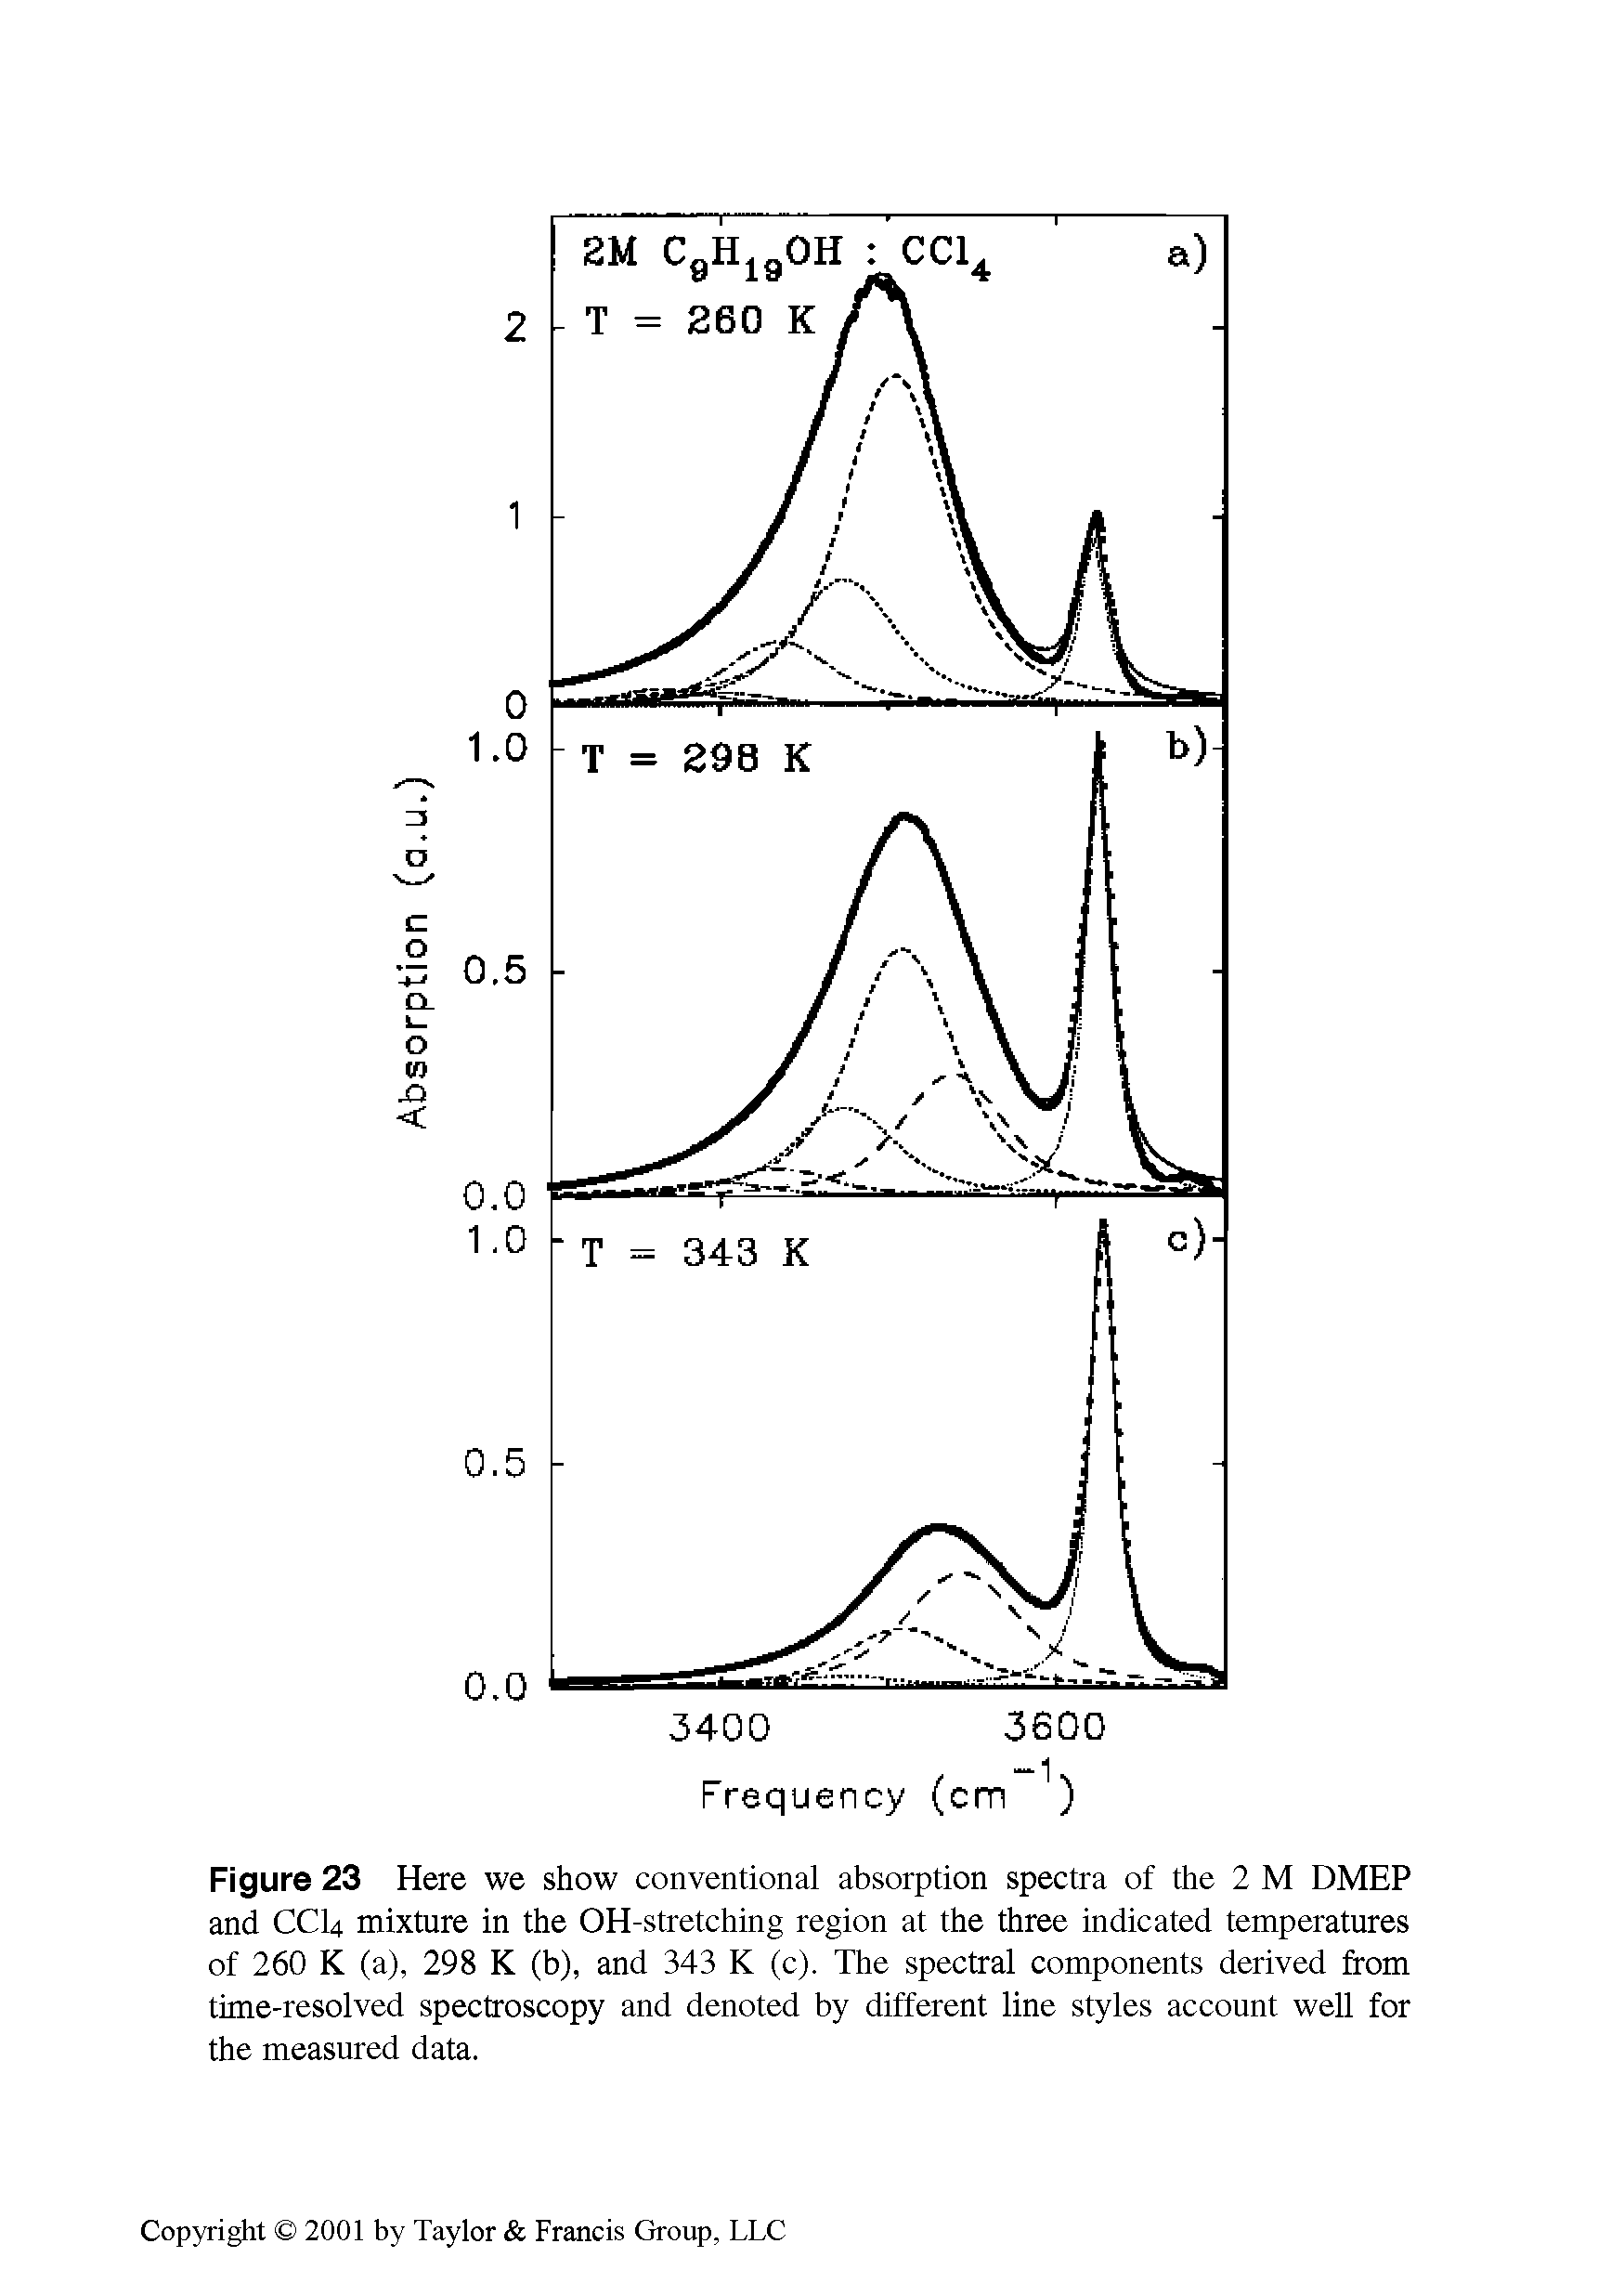 Figure 23 Here we show conventional absorption spectra of the 2 M DMEP and CCI4 mixture in the OH-stretching region at the three indicated temperatures of 260 K (a), 298 K (b), and 343 K (c). The spectral components derived from time-resolved spectroscopy and denoted by different line styles account well for the measured data.